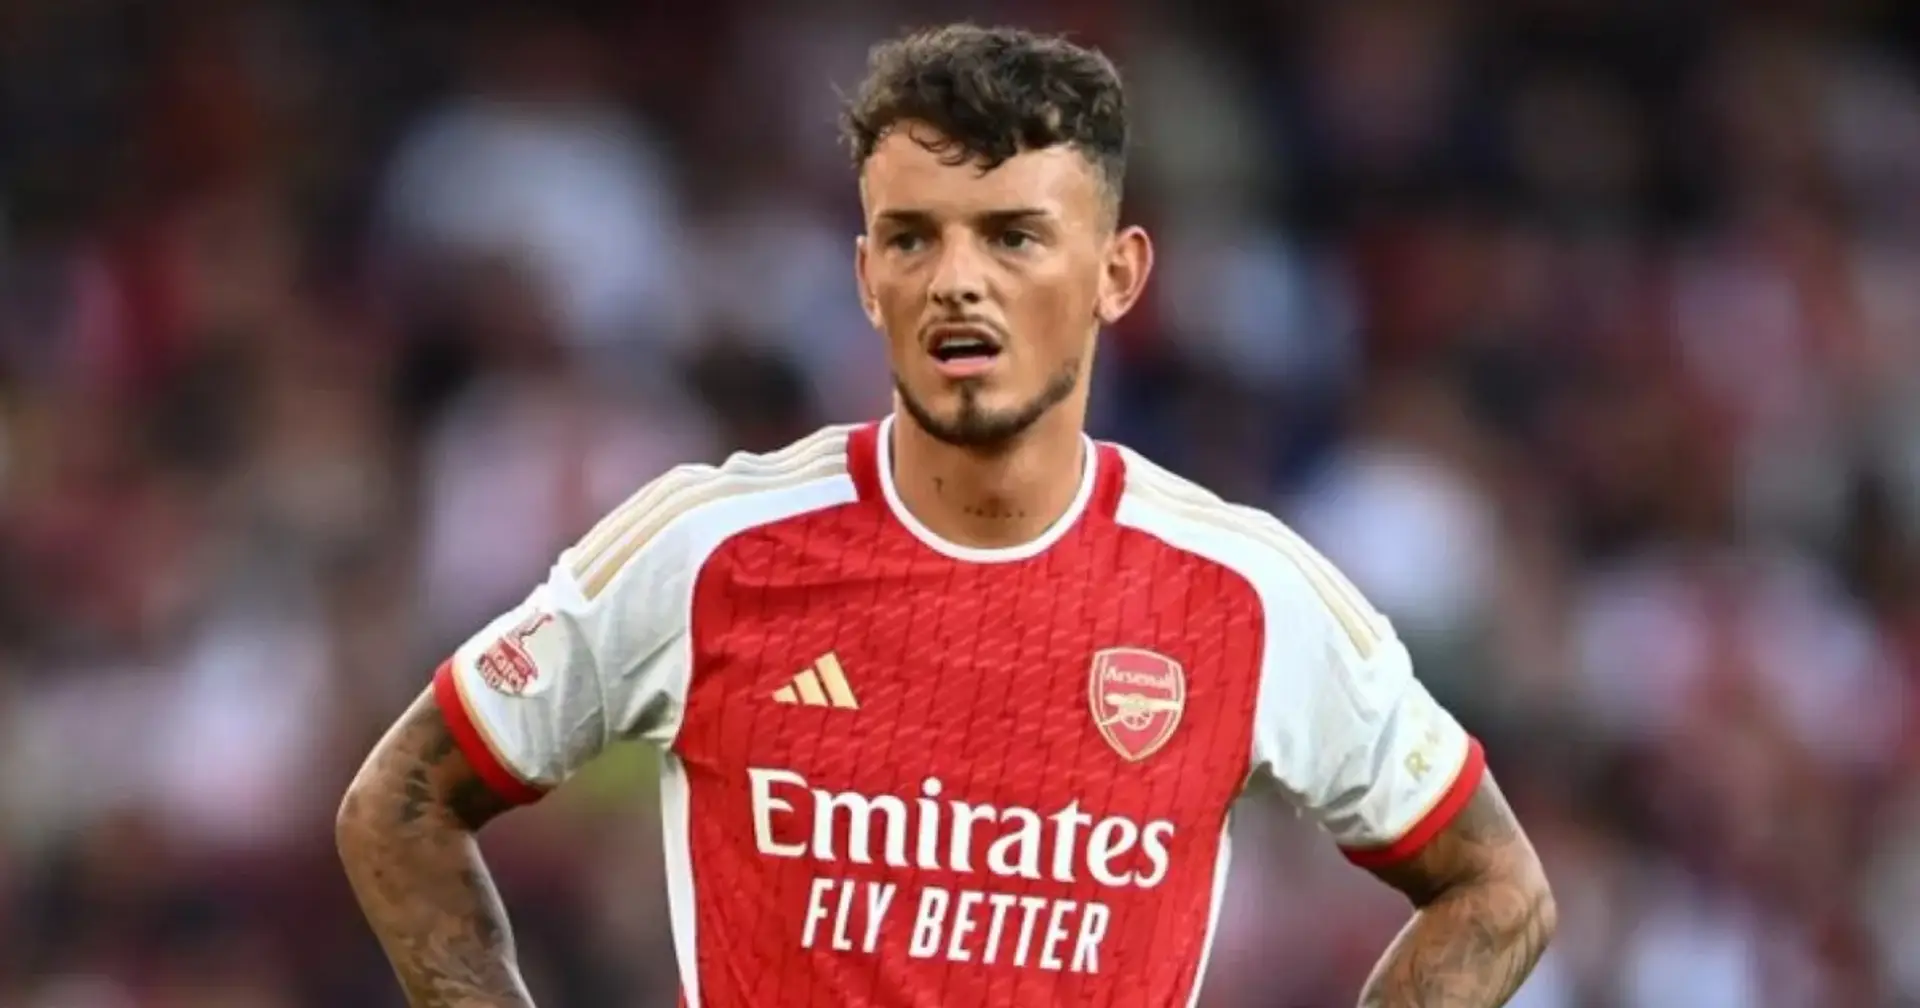 Explained: Why Arsenal are offering new contract to Ben White